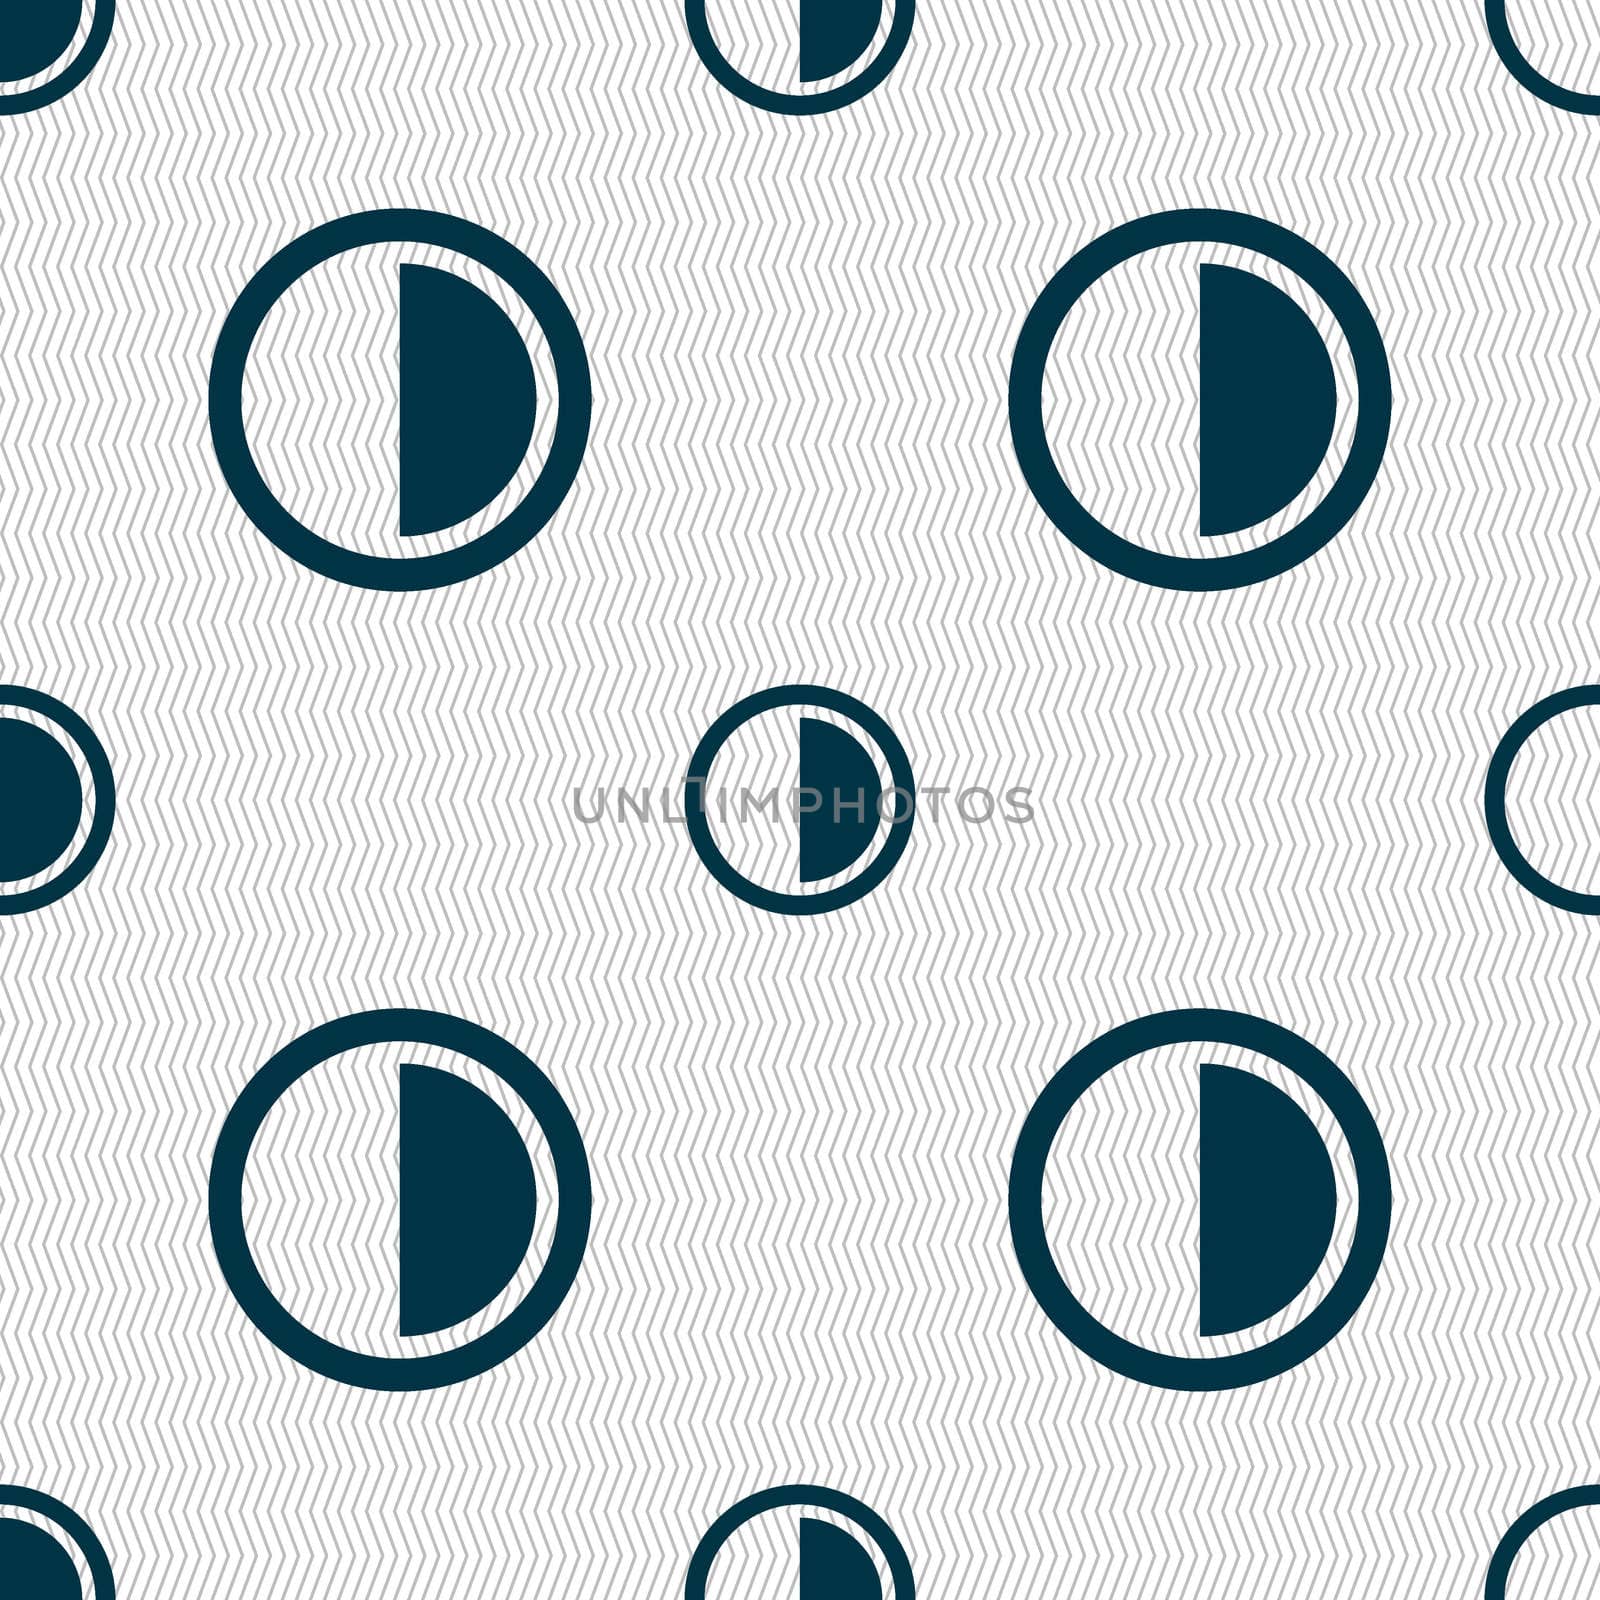 contrast icon sign. Seamless abstract background with geometric shapes. illustration